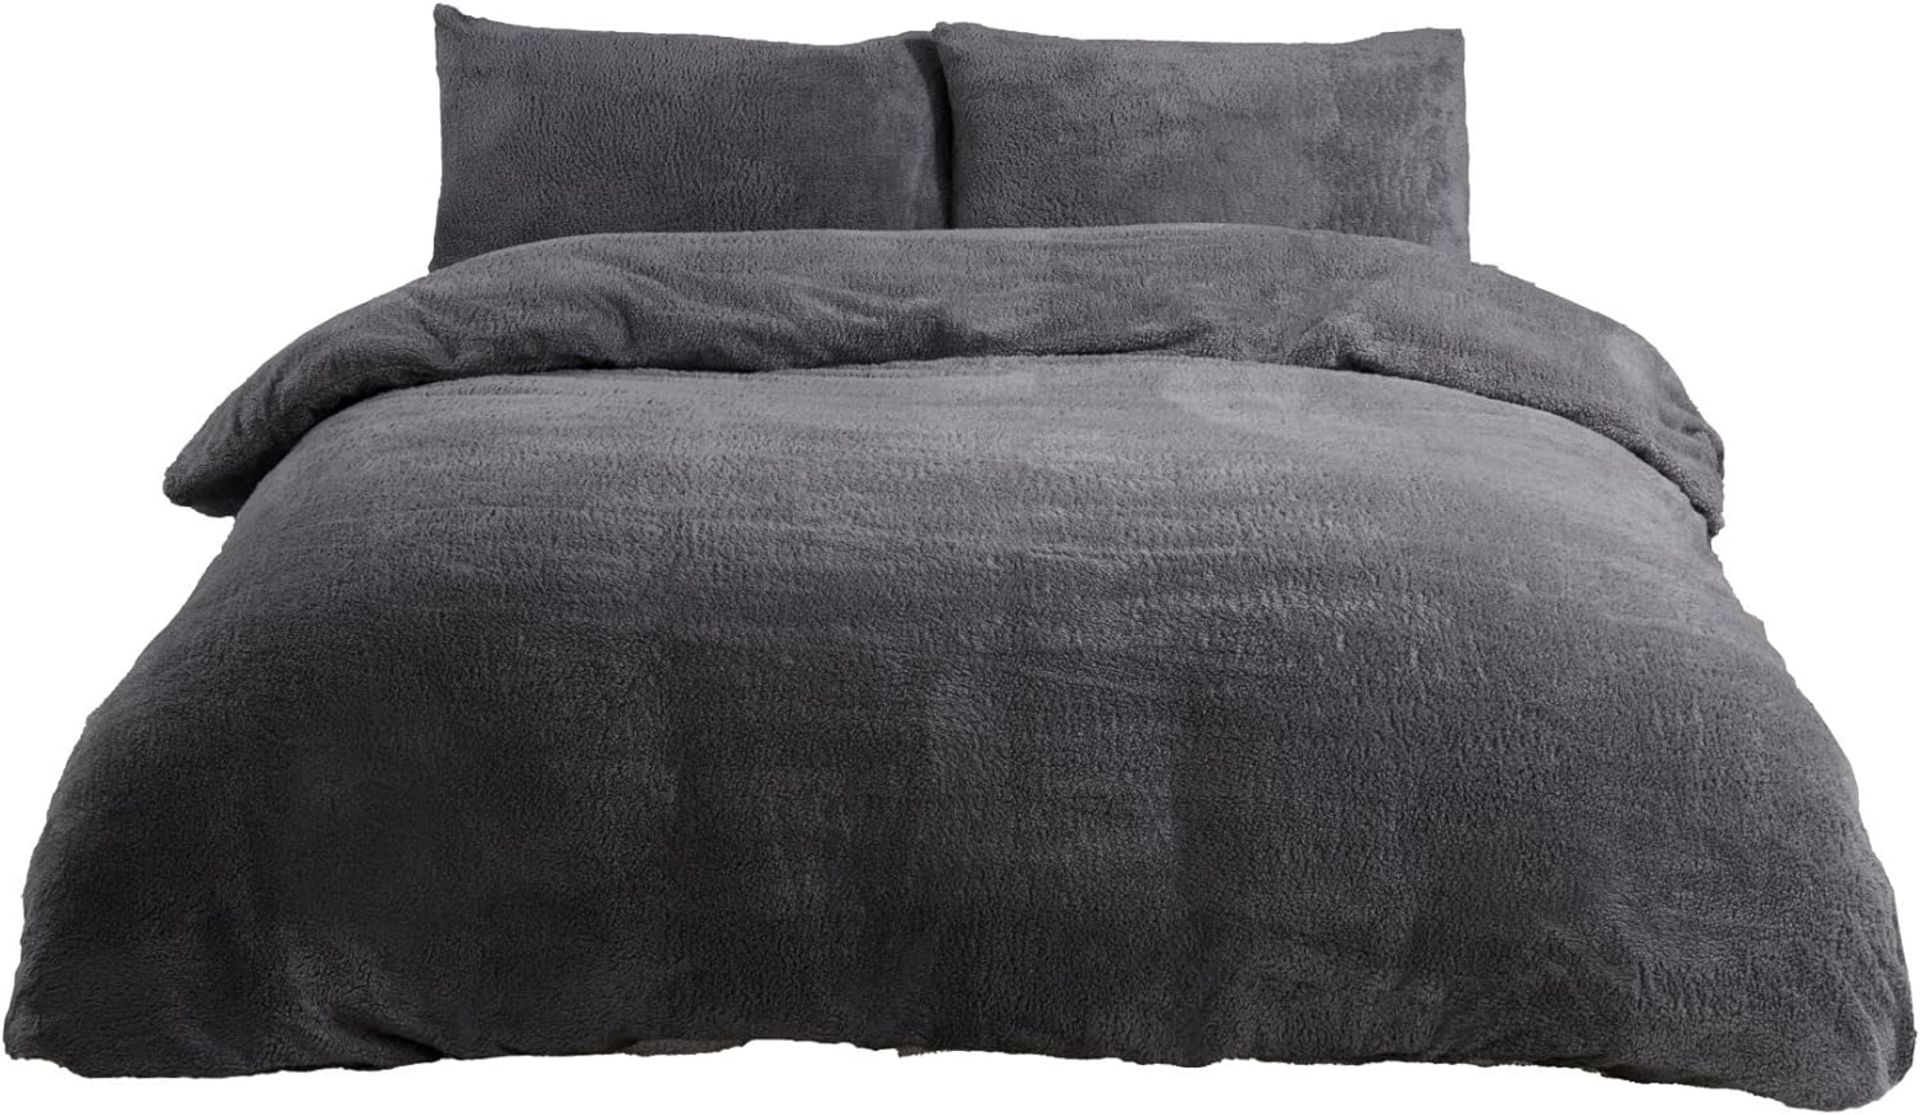 6x NEW & PACKAGED SLEEPDOWN Cosy Collection Teddy Fleece KING SIZE Duvet Set - CHARCOAL. RRP £43